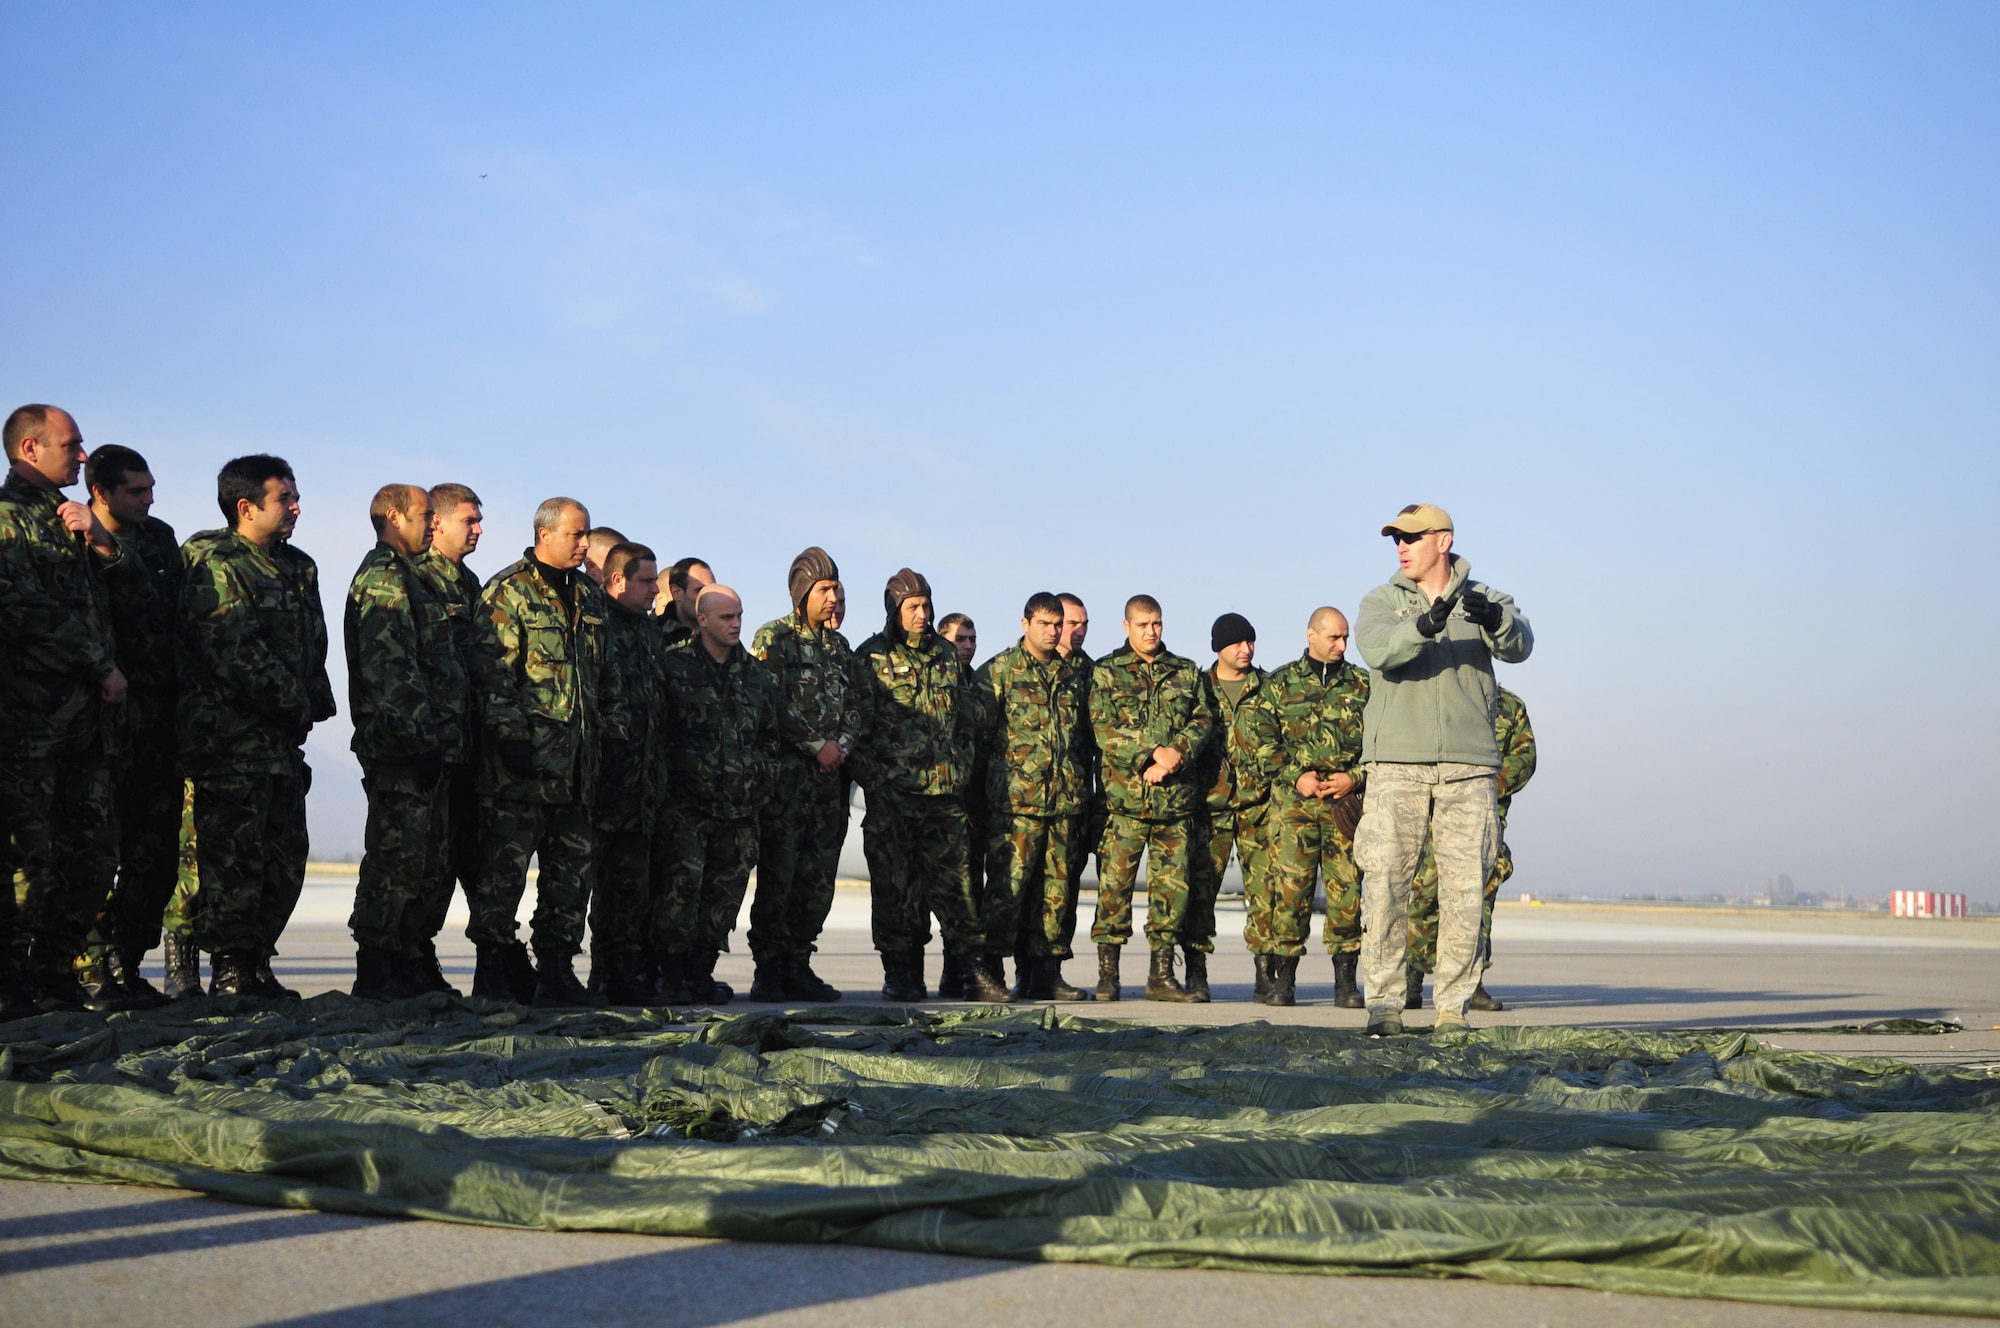 U.S. Air Force Tech. Sgt. Kurtis Musson from the 435th Contingency Response Group goes over some safety procedures with Bulgarian paratroopers prior to jumping from a C-130J Super Hercules in Plovdiv, Bulgarian, Oct. 25. The Airmen are participating in Thracian Fall 2010, a two week on-site training deployment designed to build partnership between the U.S. and Bulgarian Air Force. During Thracian Fall U.S. paratroopers were able to assist 1077 Bulgarian Airmen receive valuable jump training. (U.S. Air Force photo by Tech. Sgt. Michael Voss)